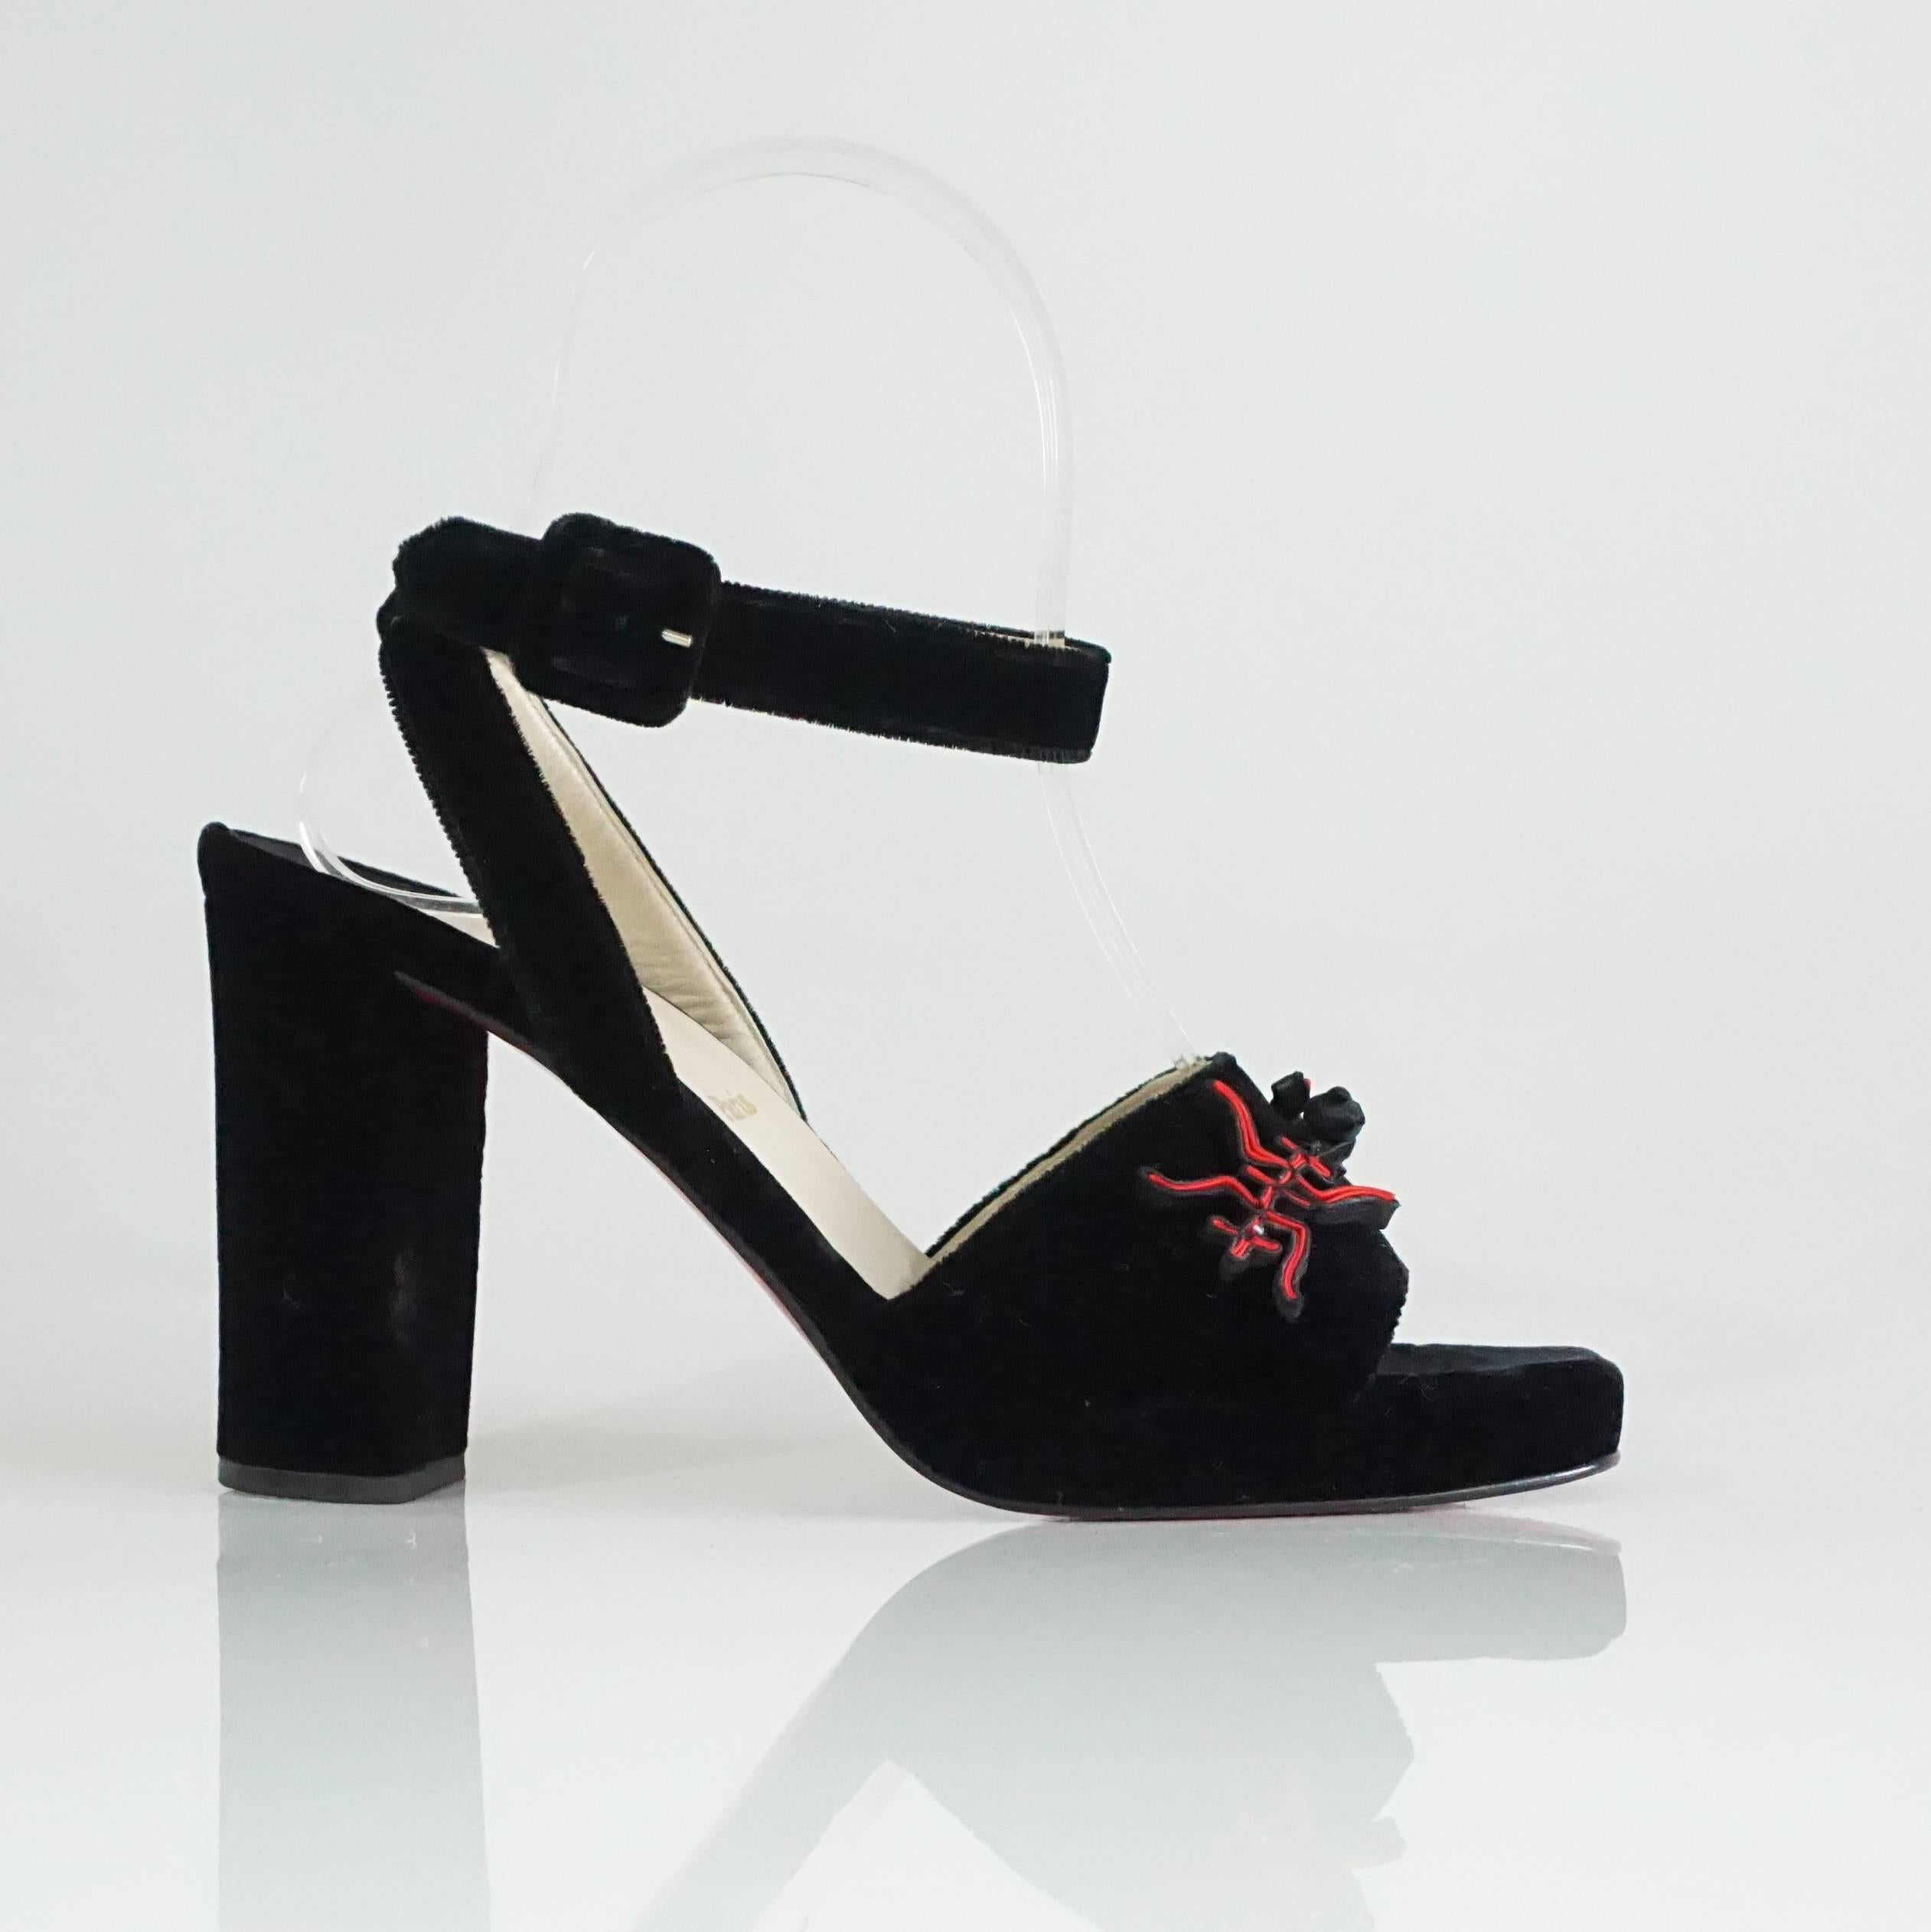 Christian Louboutin Black Velvet Ankle Strap Sandal with Chunky Heel w. red and black satin Asian theme Decorative detail on the front-37 This beautiful and very in style evening sandal is a true collectors dream. The front strap is 2